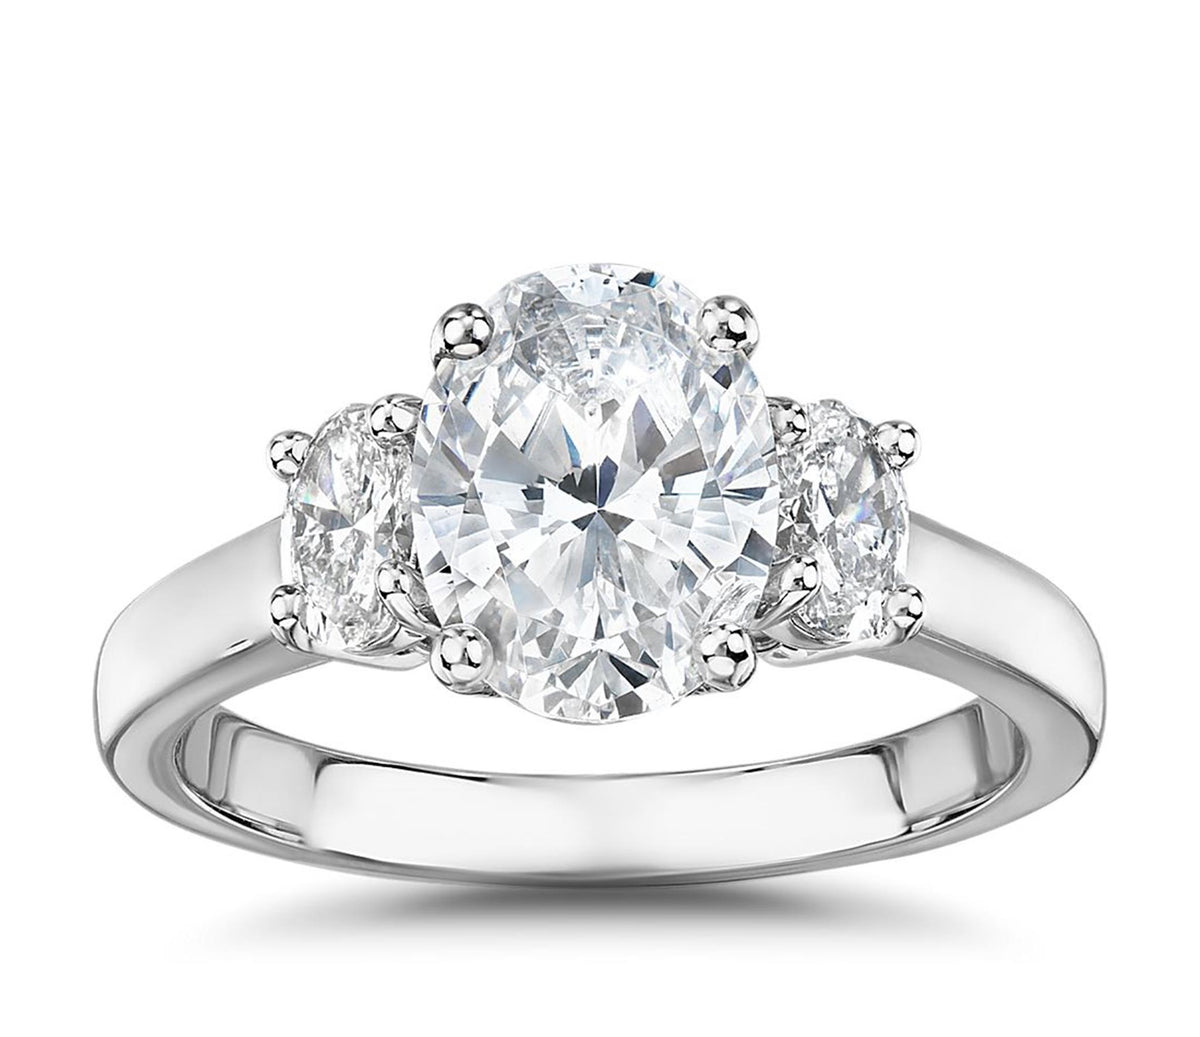 14Kt White Gold Three-Stone Engagement Ring Mounting With 0.29cttw Natural Diamonds